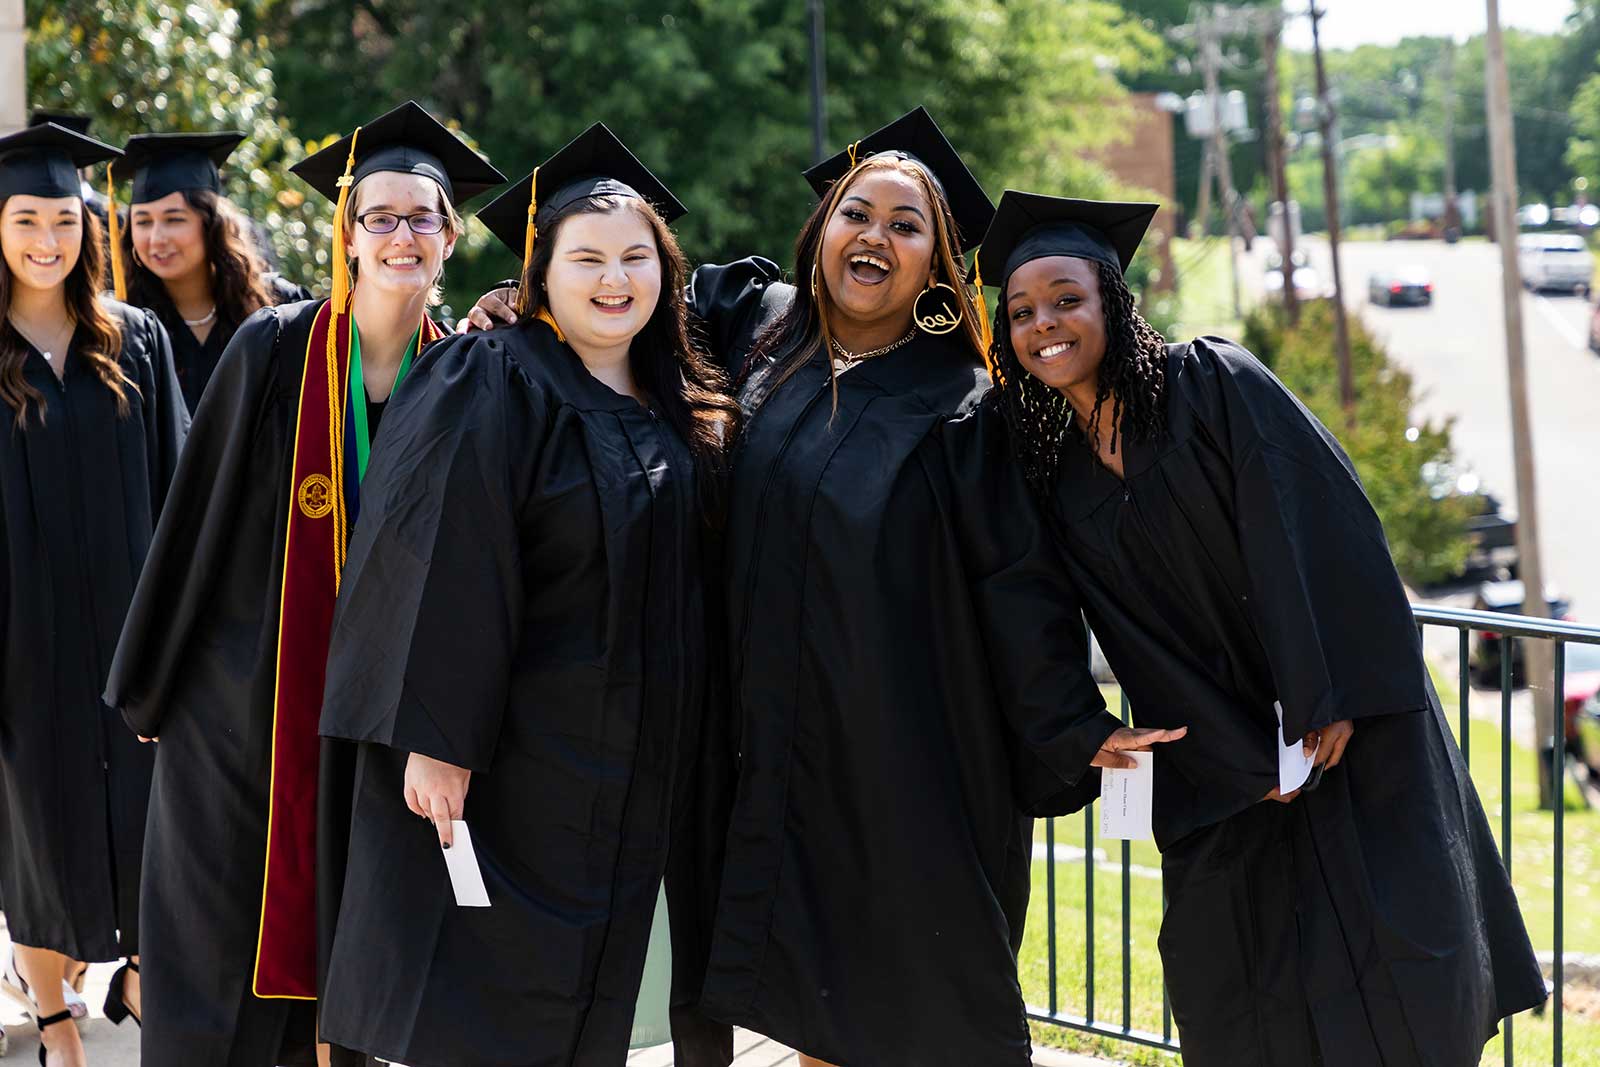 From speech-language pathology and audiology to clinical research and assistive technology, a Communication Sciences and Disorders major at FHU opens the door to numerous promising career paths in the field of communication sciences and disorders.